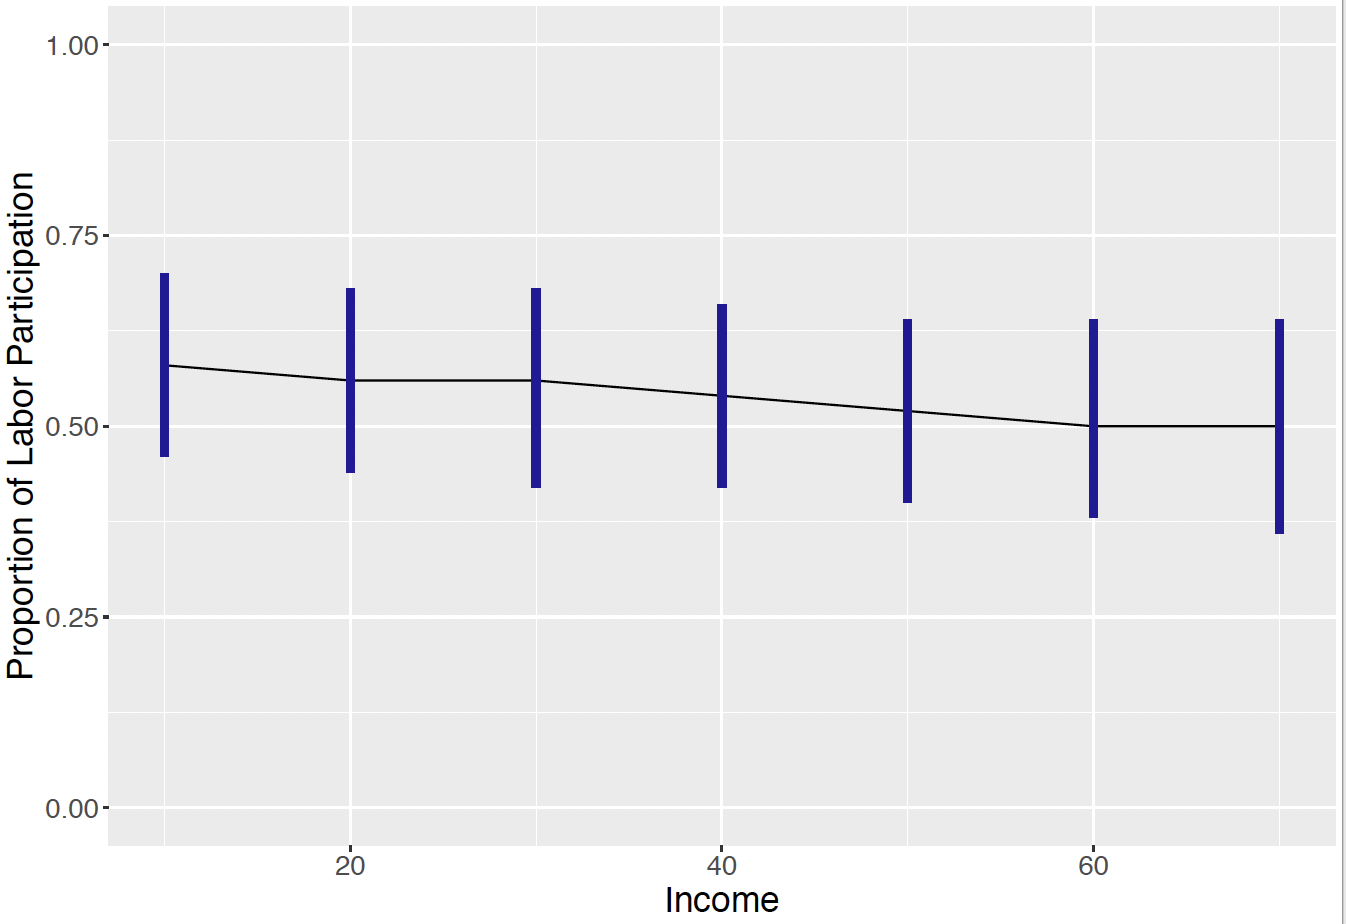 Prediction intervals for the fraction of labor participation of a sample of size $n = 50$ for seven values of the income variable.